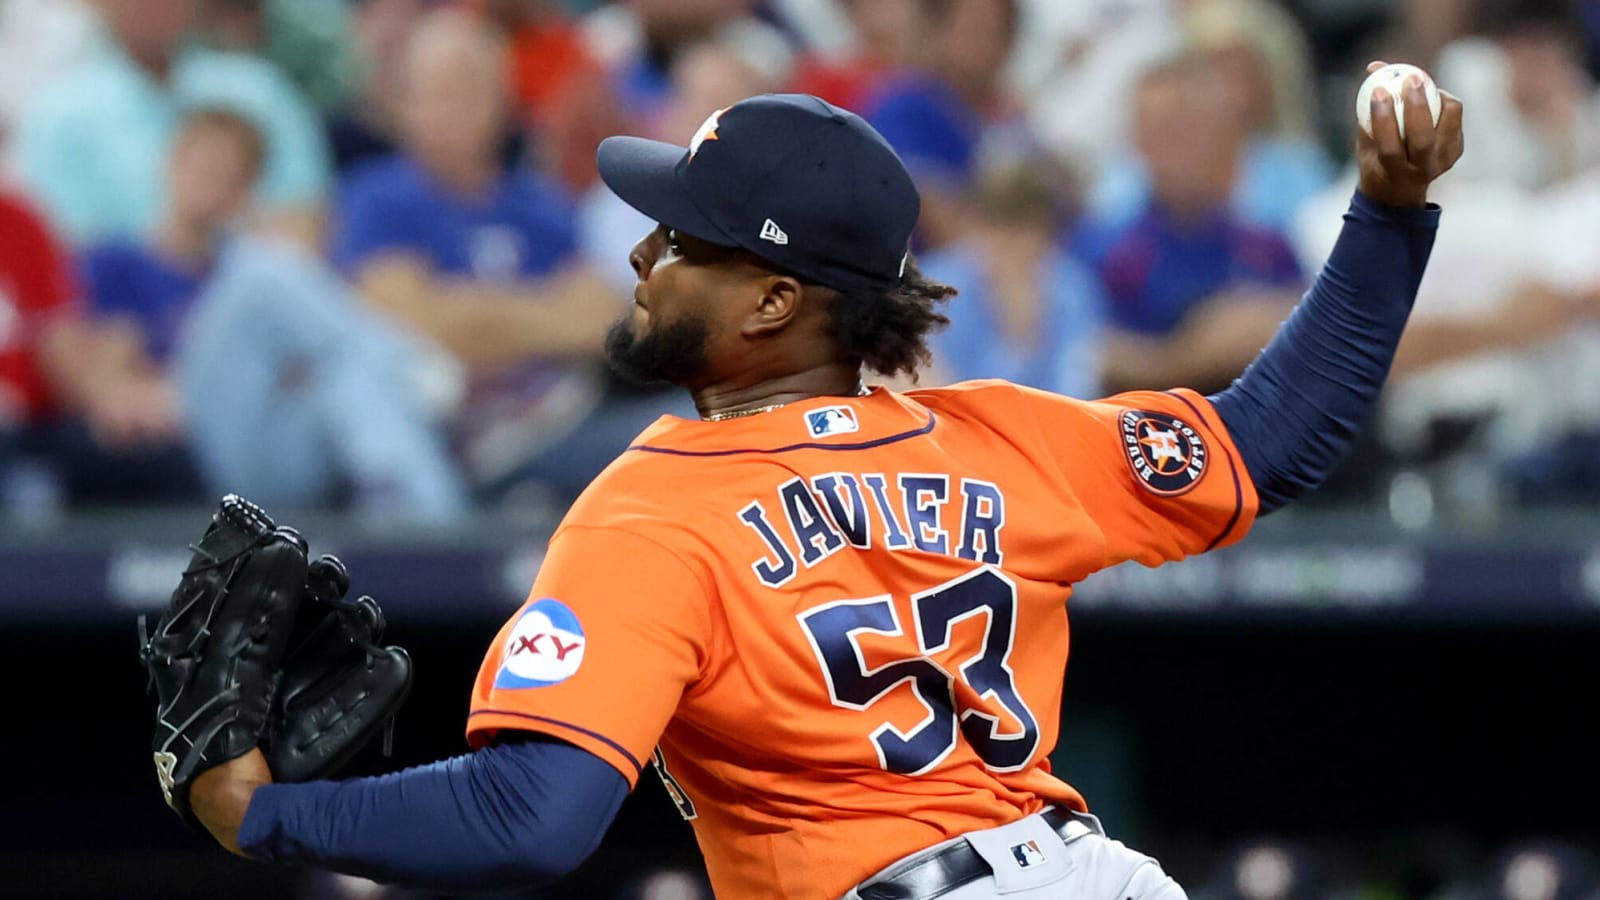 Watch: Astros SP Cristian Javier has historic streak snapped in excruciating fashion